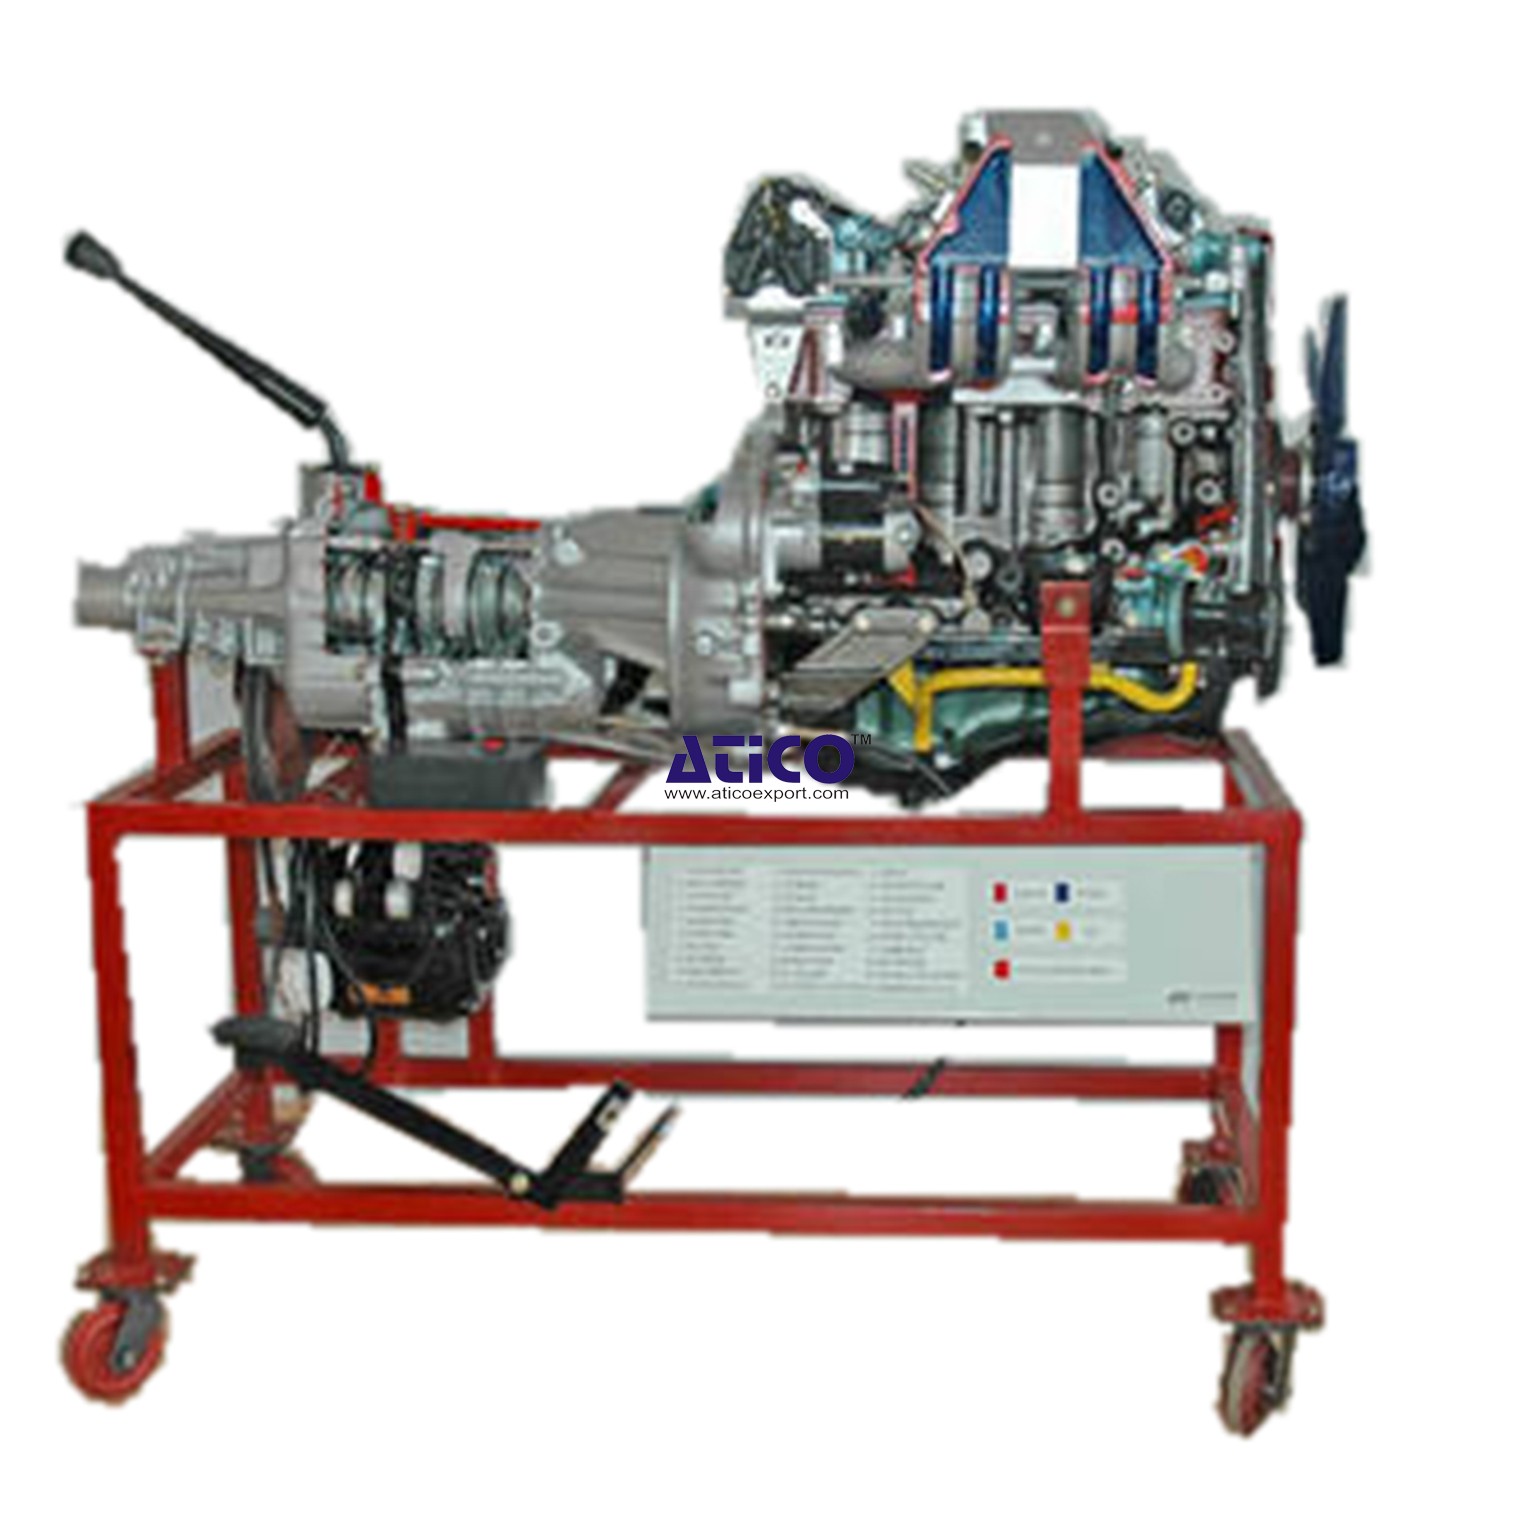 Sectional Working Model Of 4 Strokes Petrol Engine